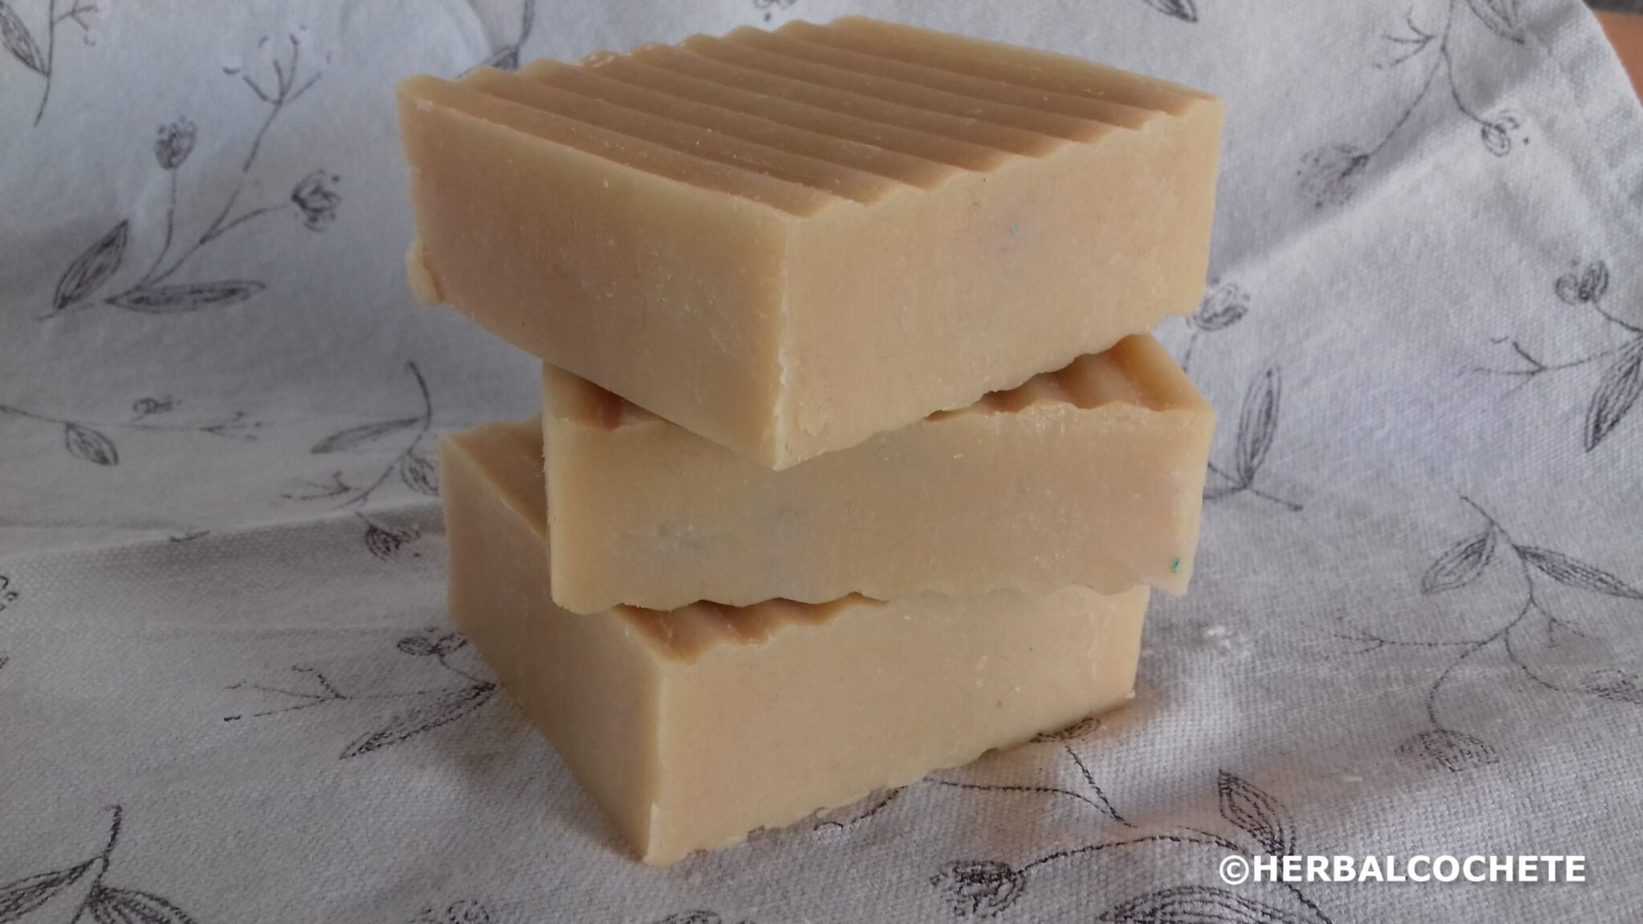 pile of 3 pretty golden brown soap bars